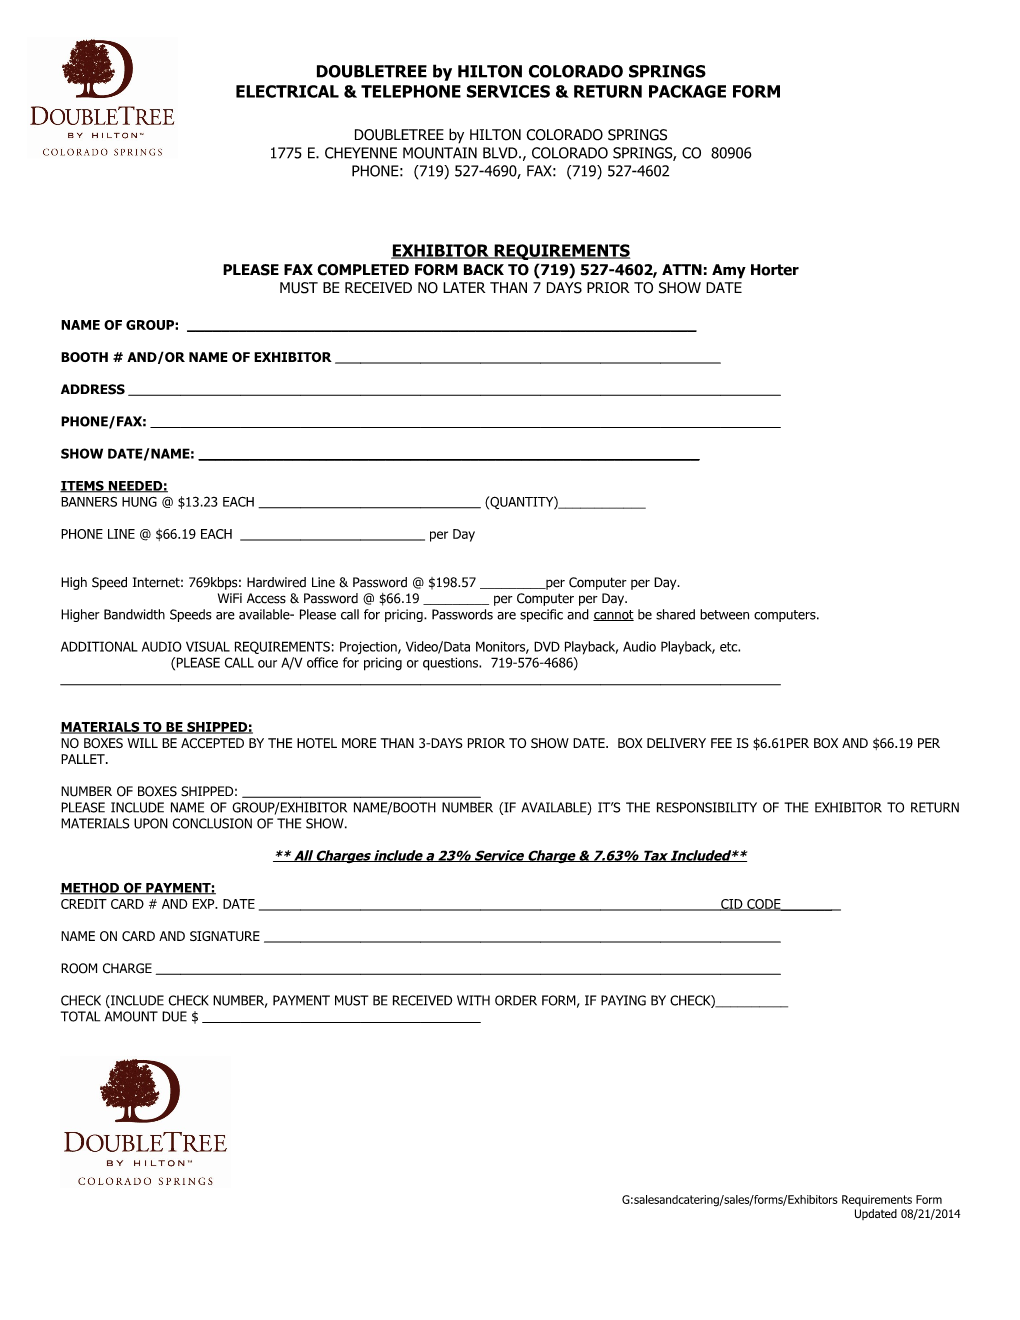 Electrical & Telephone Services & Return Package Form